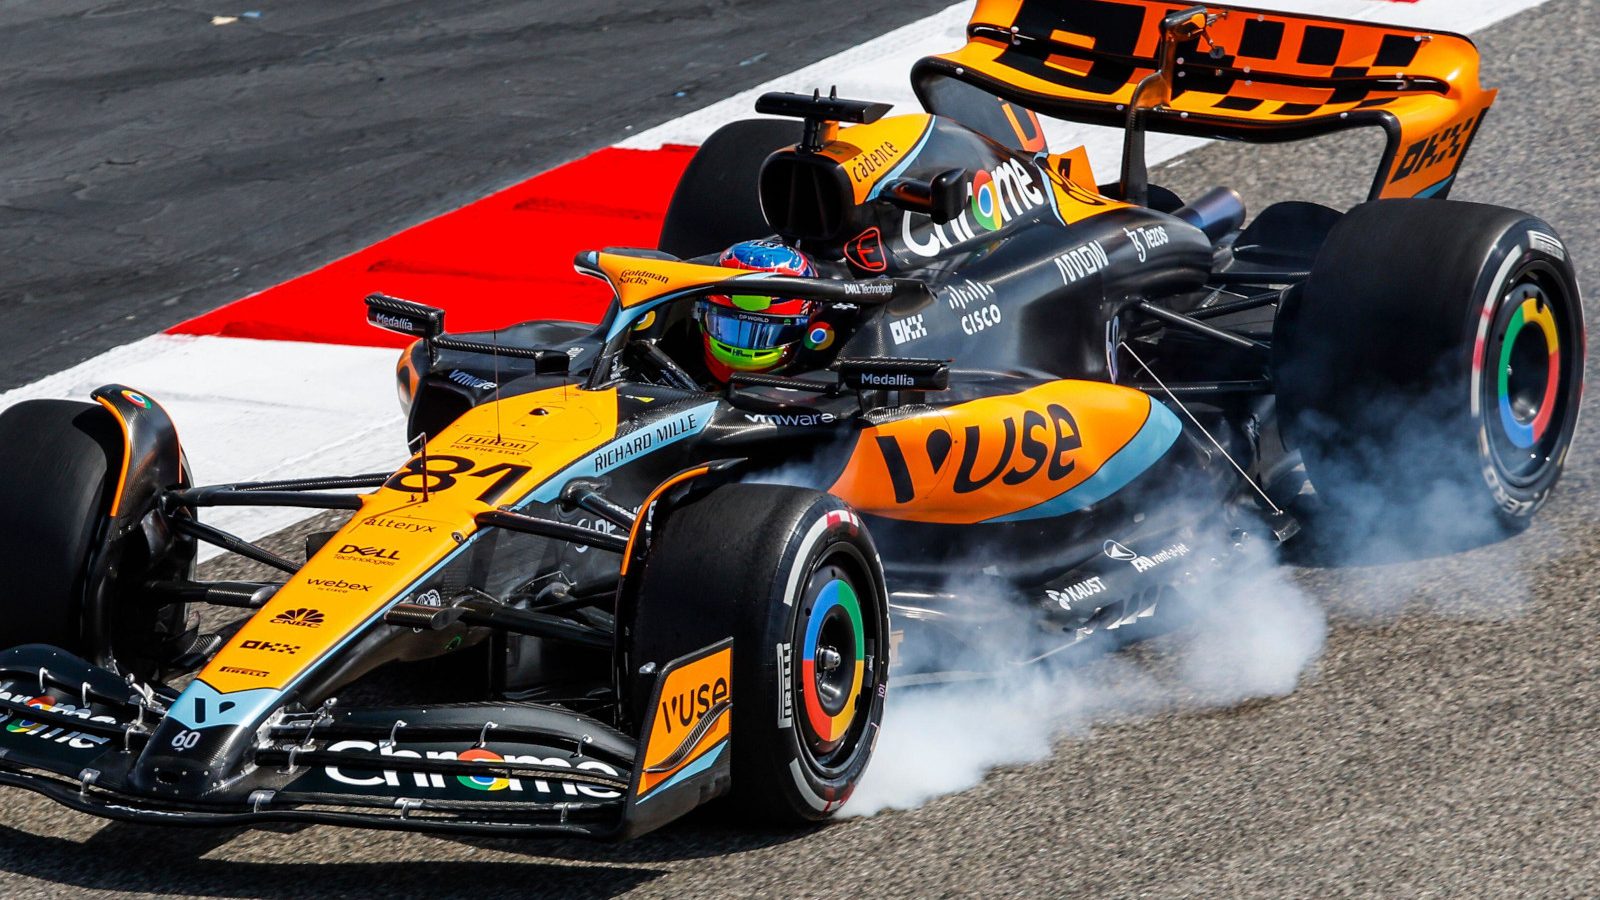 Jolyon Palmer doubts McLaren can compete in midfield with "fundamental